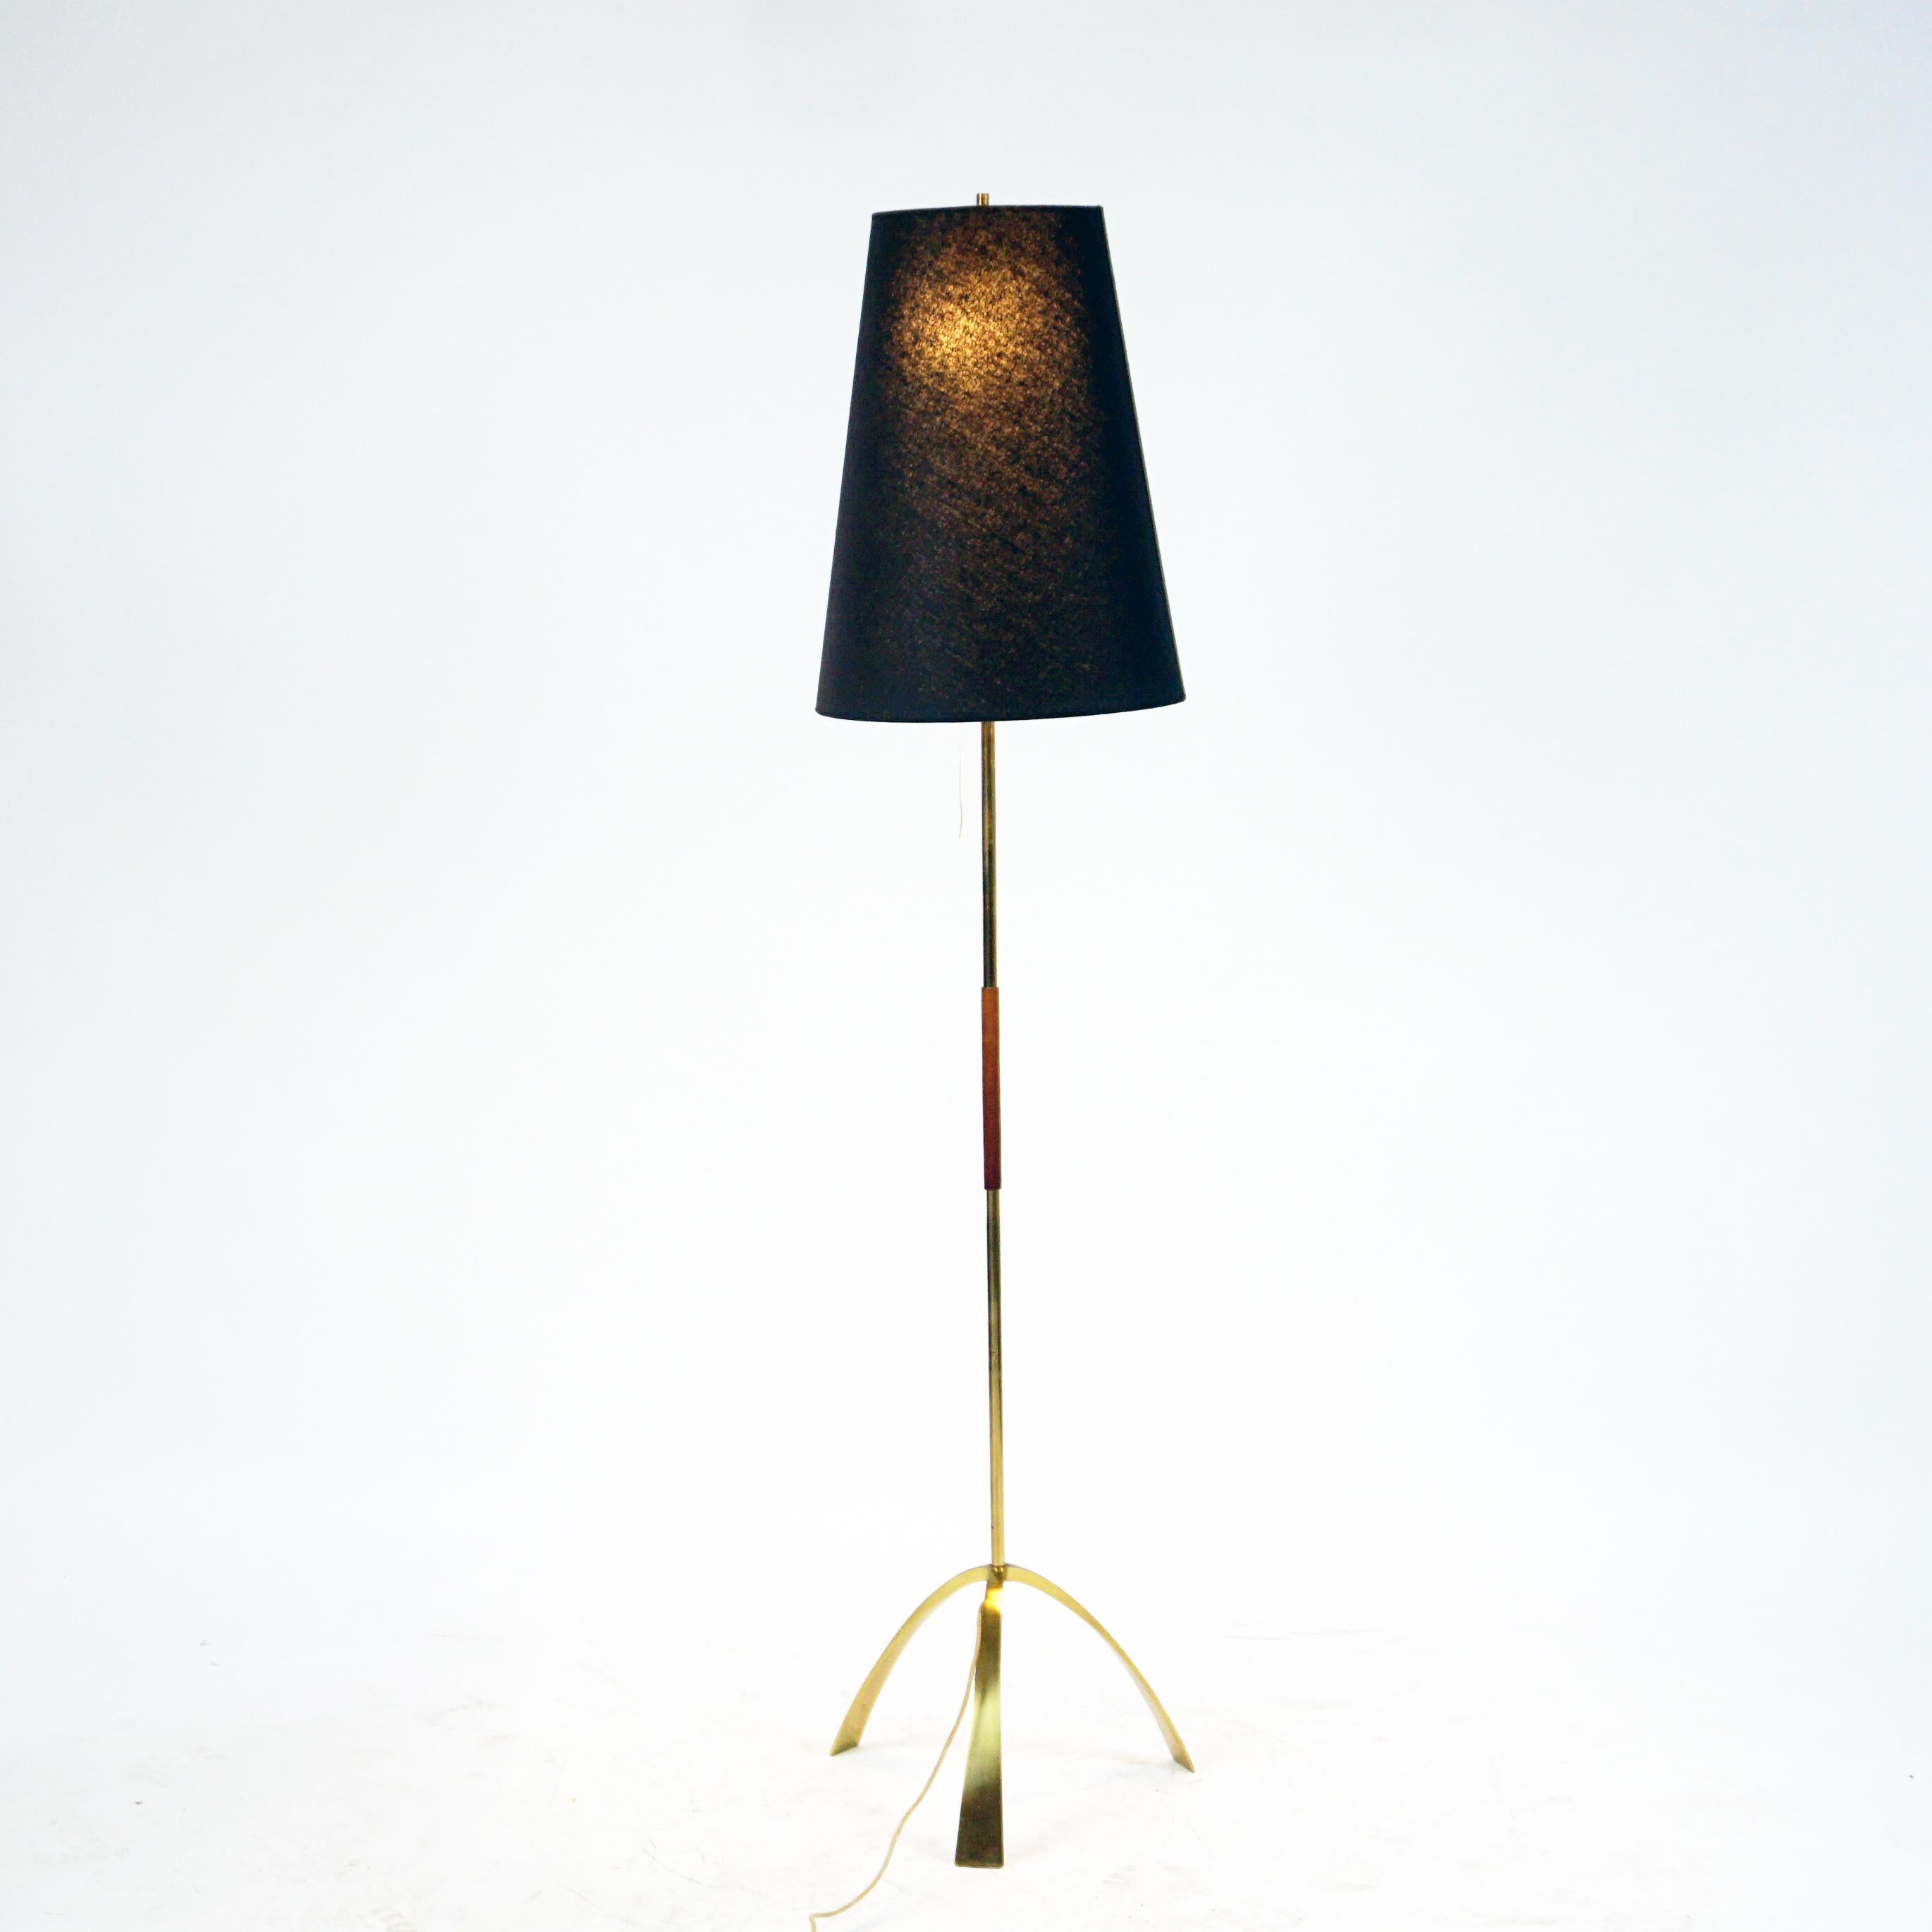 This charming Austrian Mid-Century Modern brass floor lamp has been designed and executed by J.T. Kalmar in Vienna Austria, Mod. 2105 Silone.
It features a tripod brass base and brass stem with Leather handle and two E27 light sockets.
J.T. Kalmar